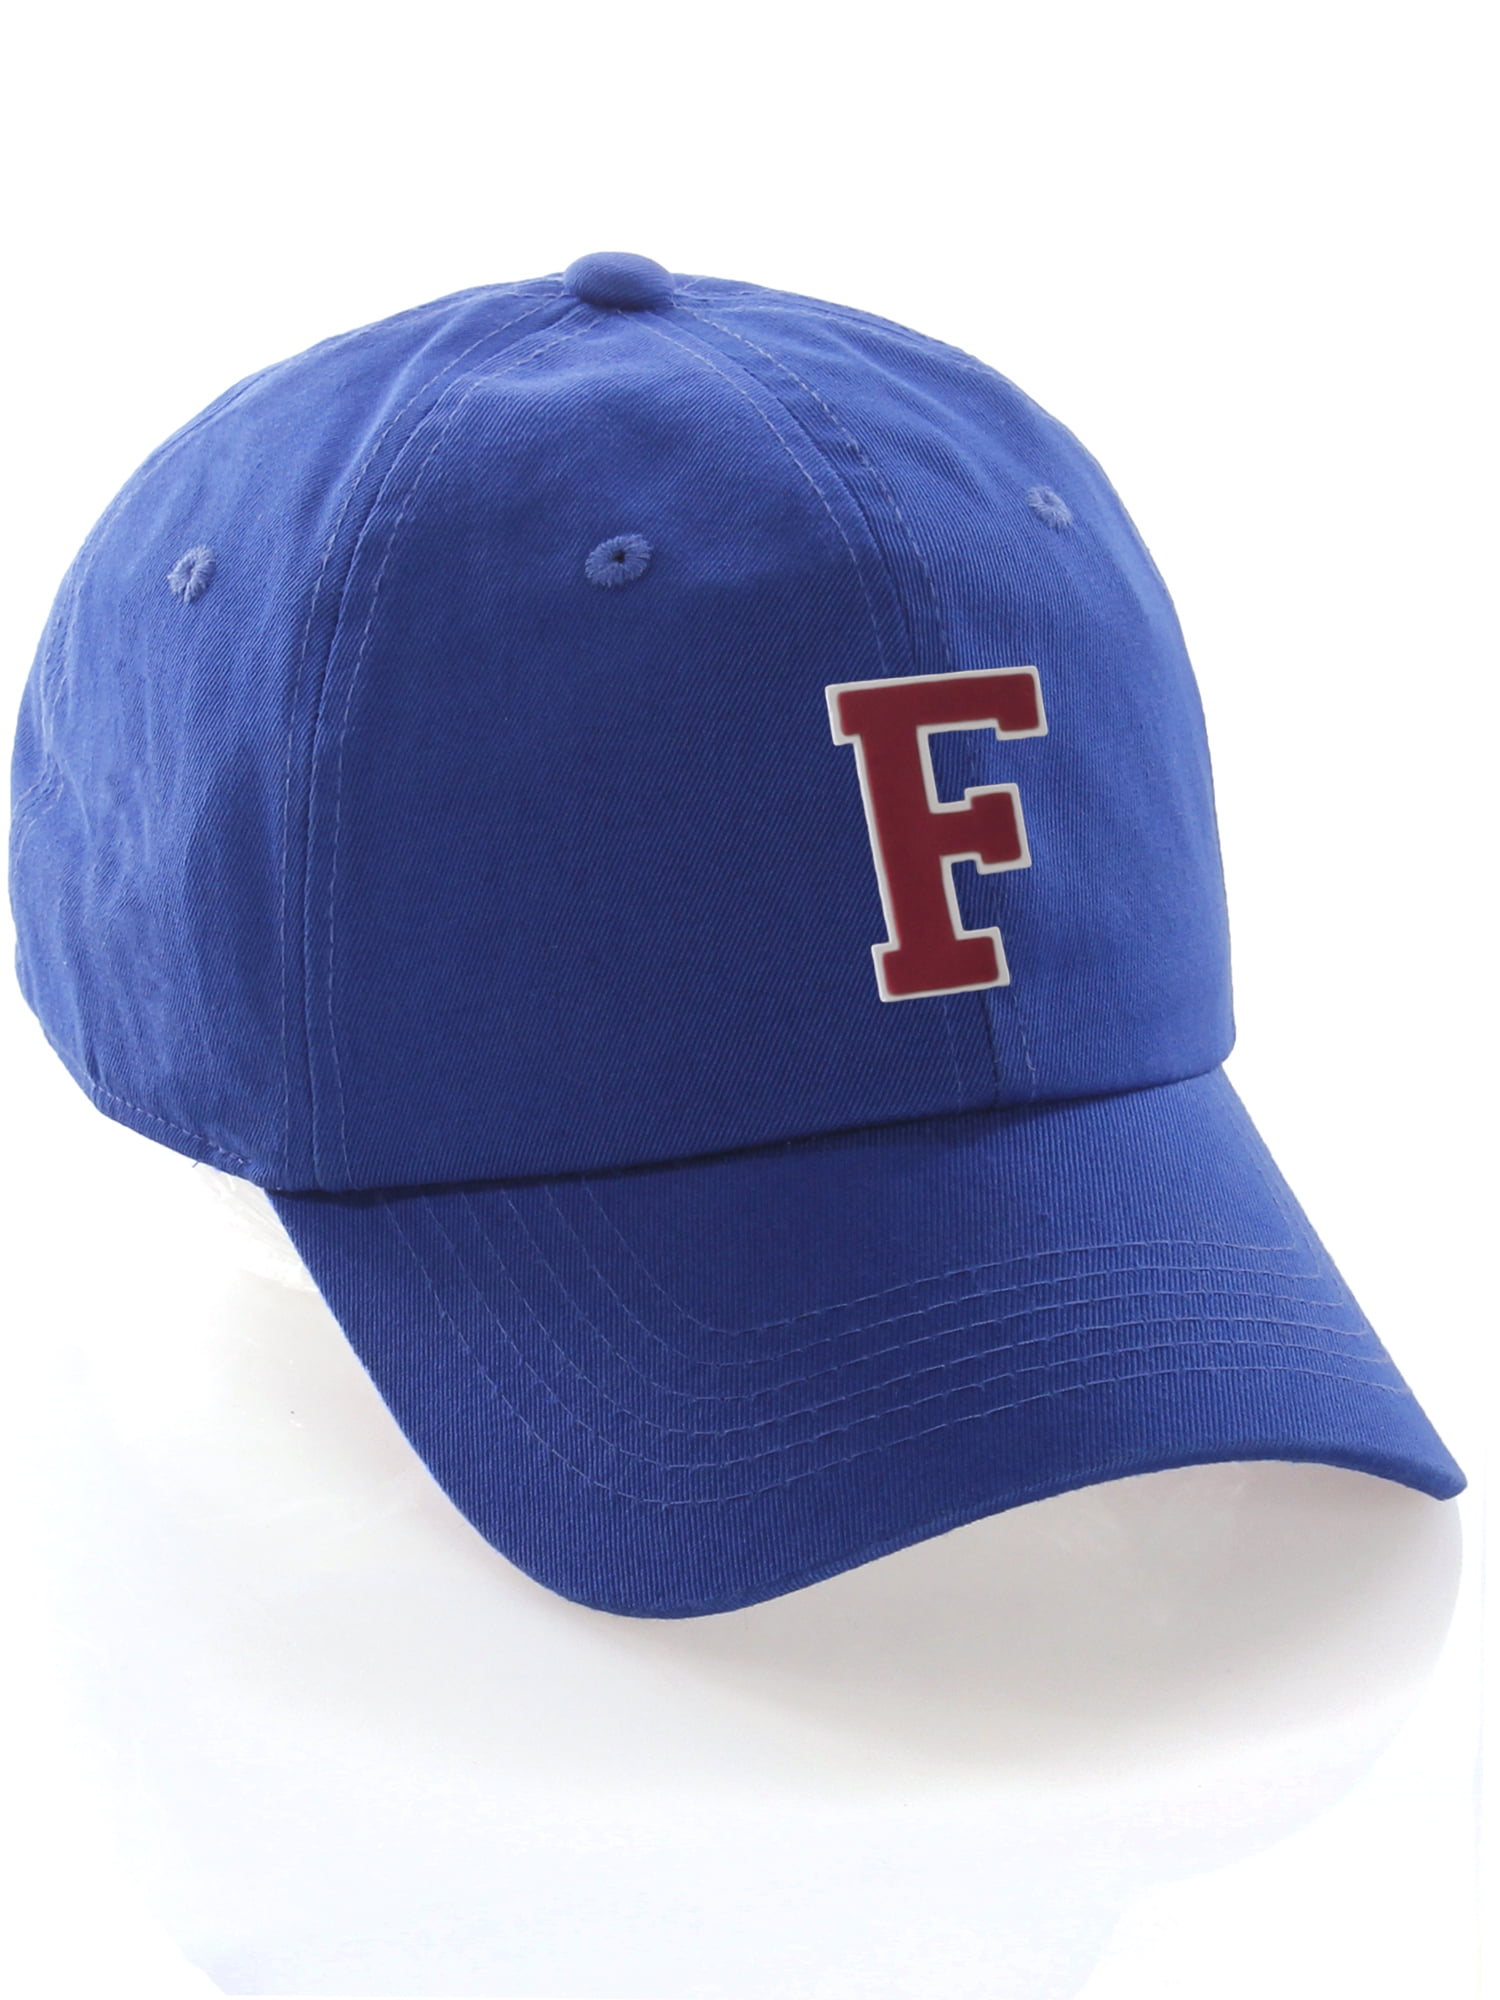 Custom Hat A to Z Initial Letters Classic Baseball Cap, Blue Hat White Red  Letter F